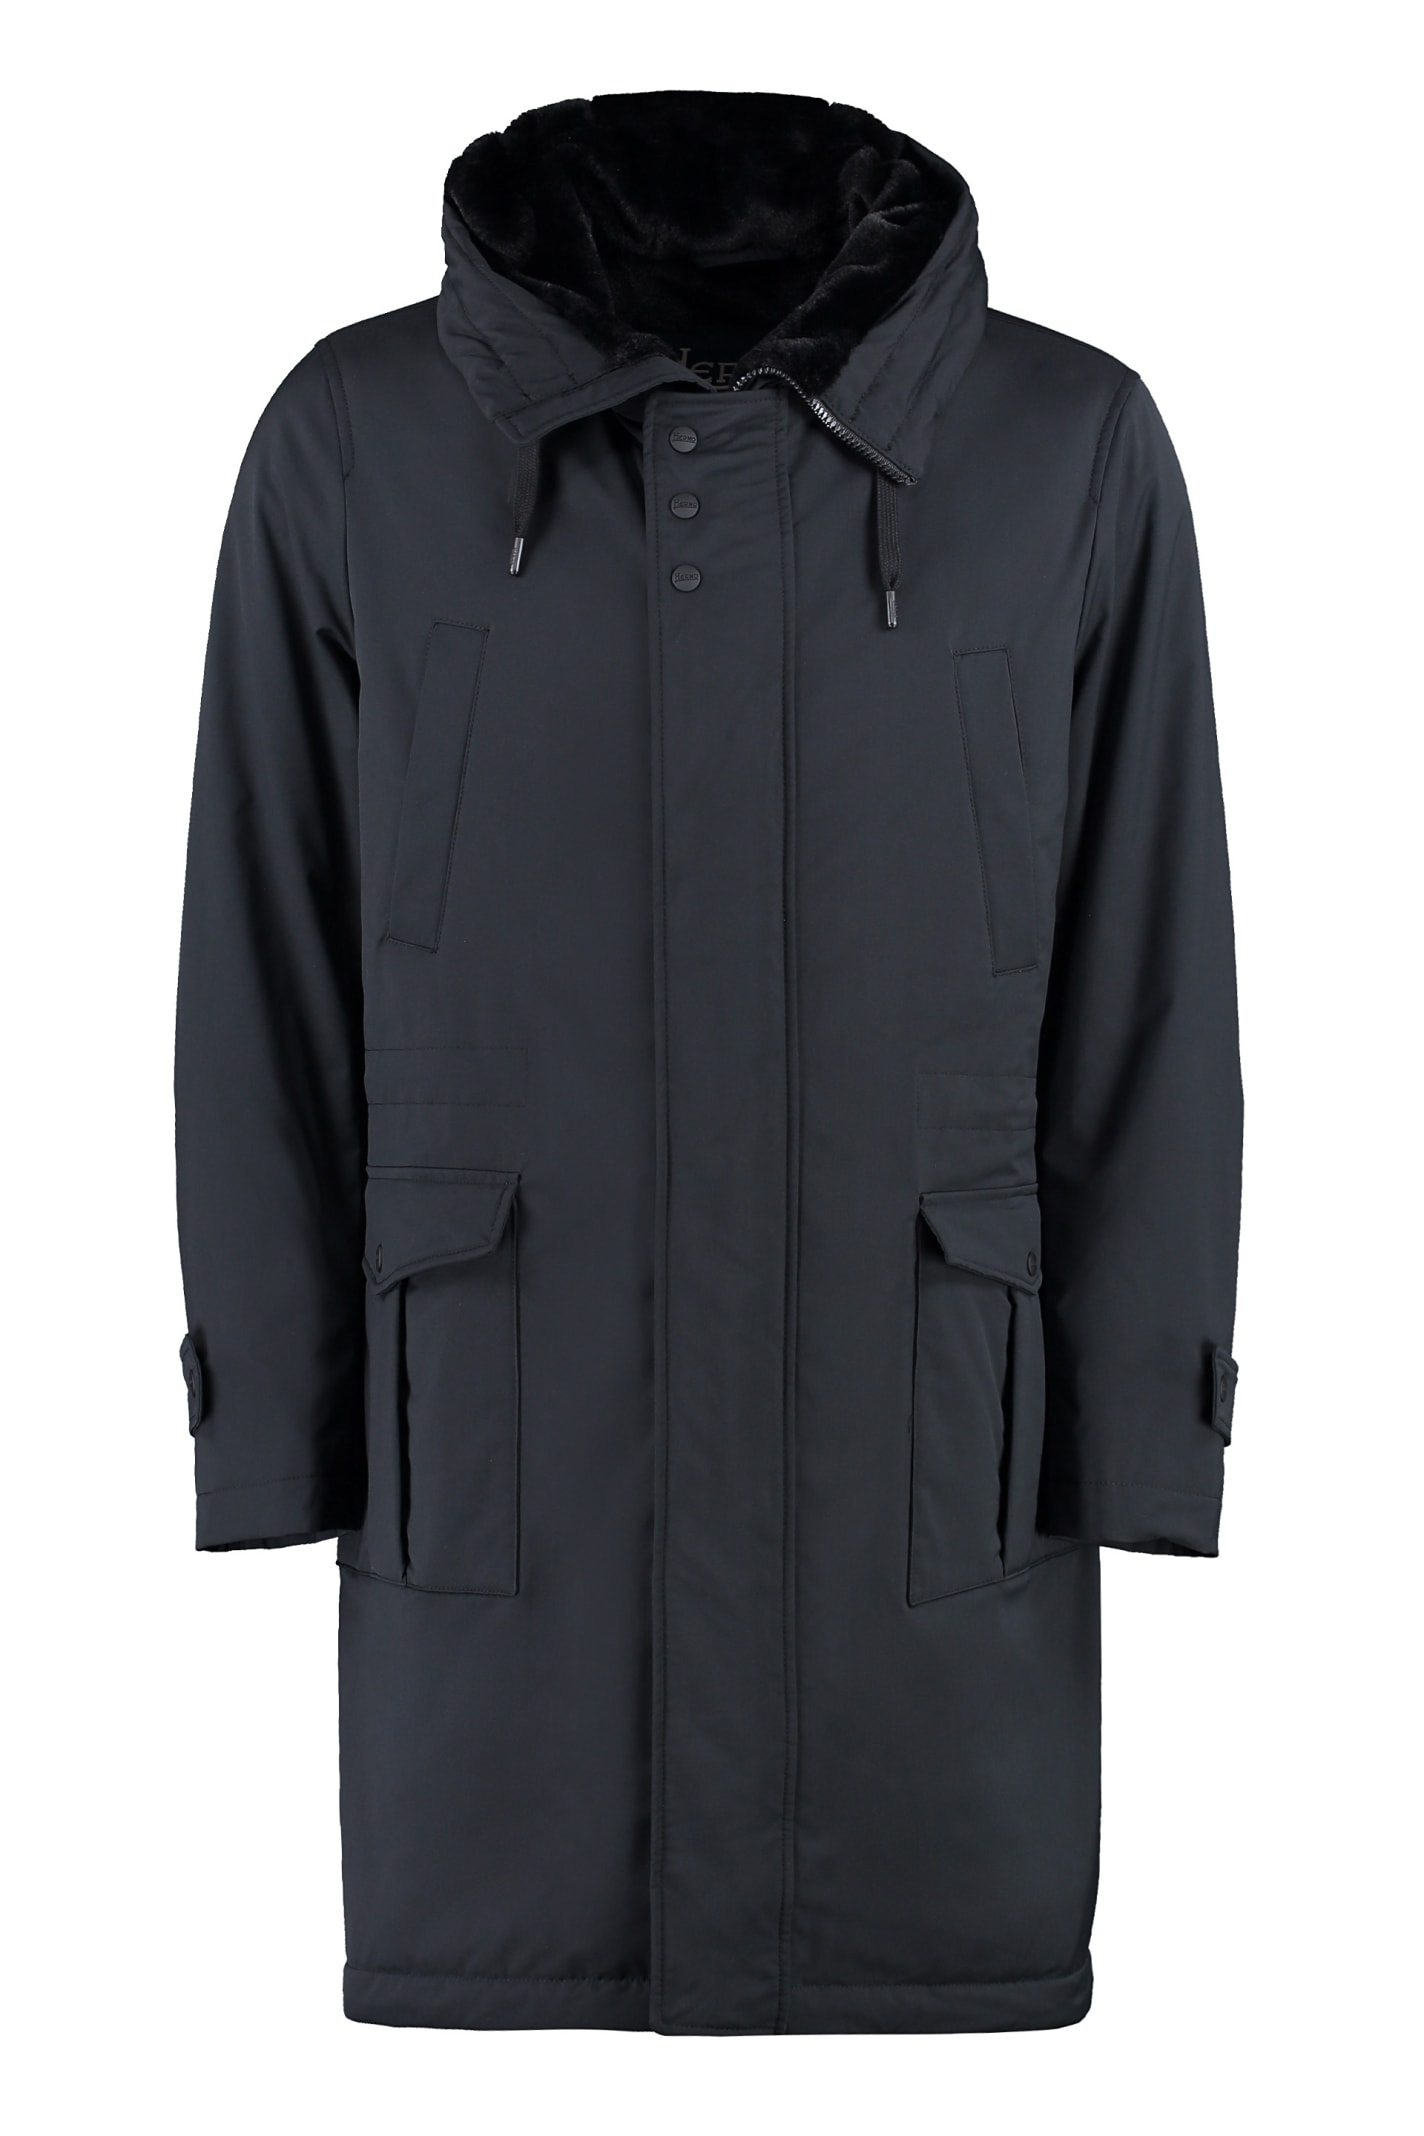 HERNO TECHNICAL FABRIC PARKA